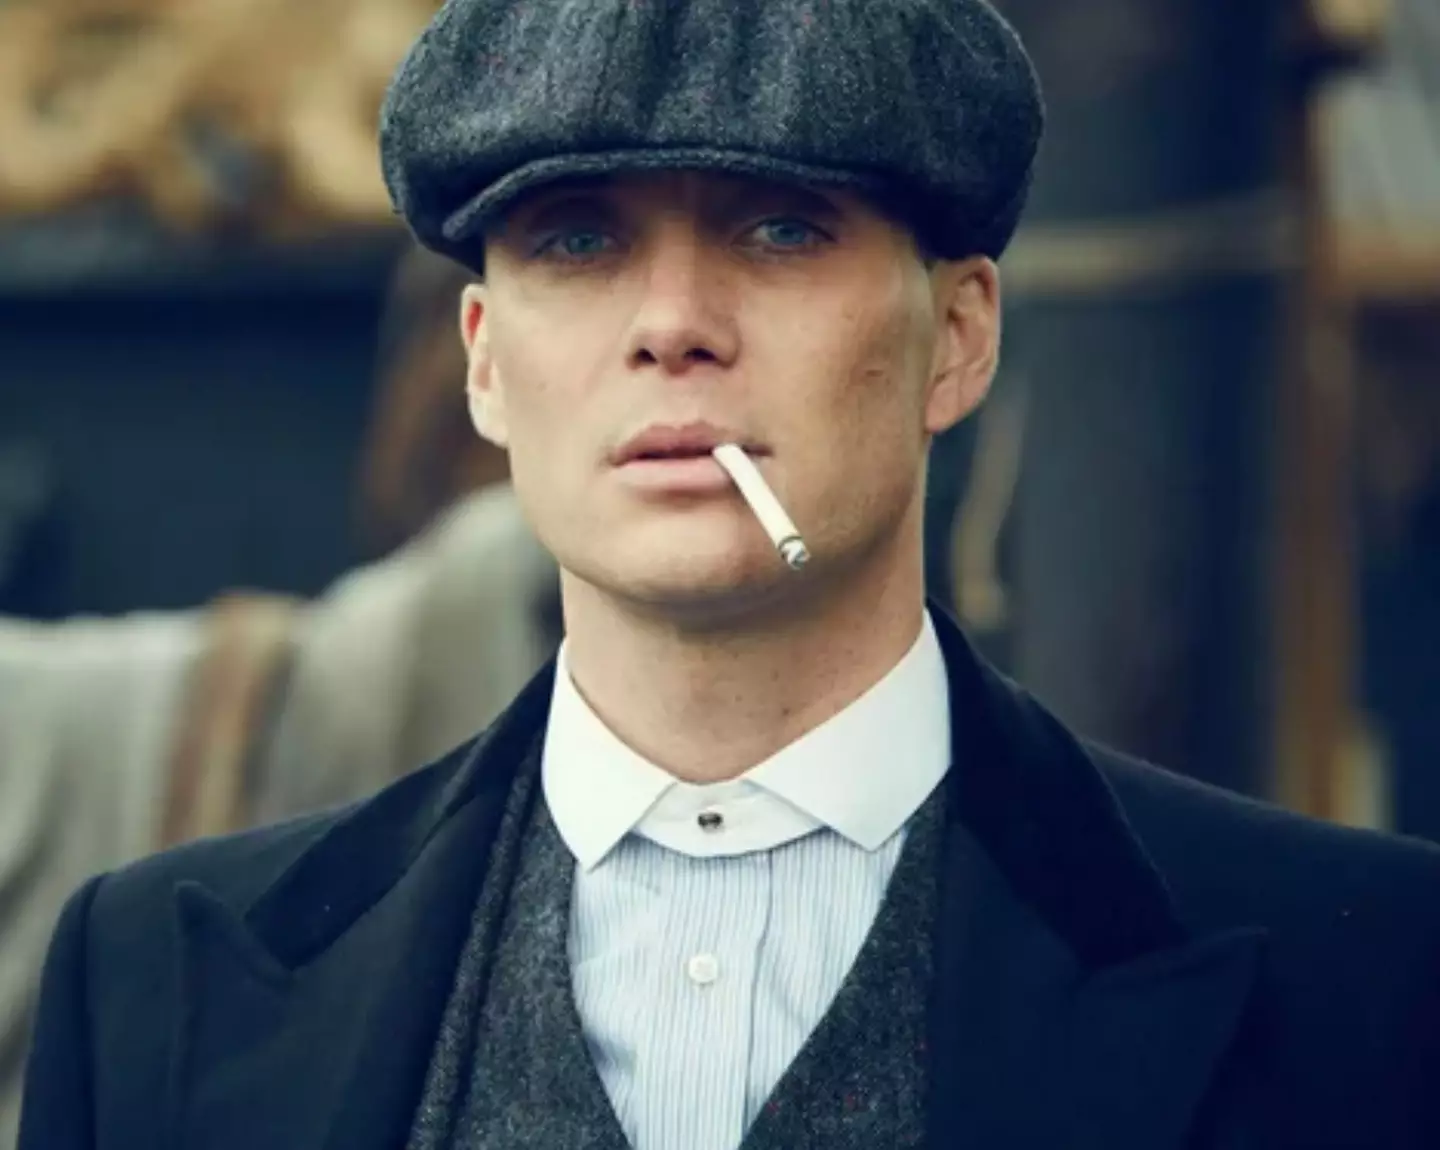 Cillian Murphy has given an update on the Peaky Blinders movie.